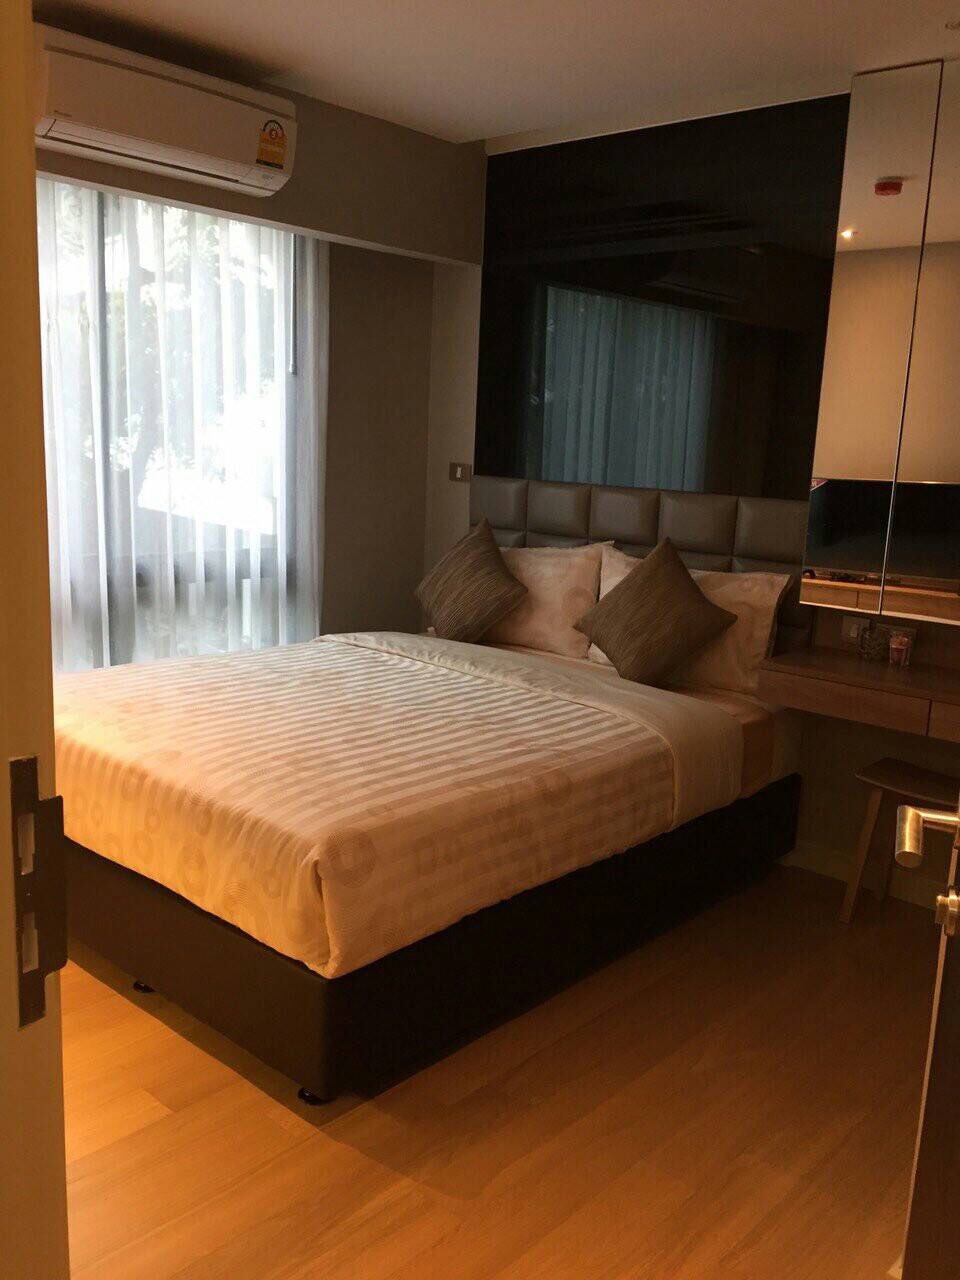 Tidy Deluxe Sukhumvit 34 condo for rent/sale in Bangkok 1 bedrooms, 38 sq.m. Near Thong lor BTS